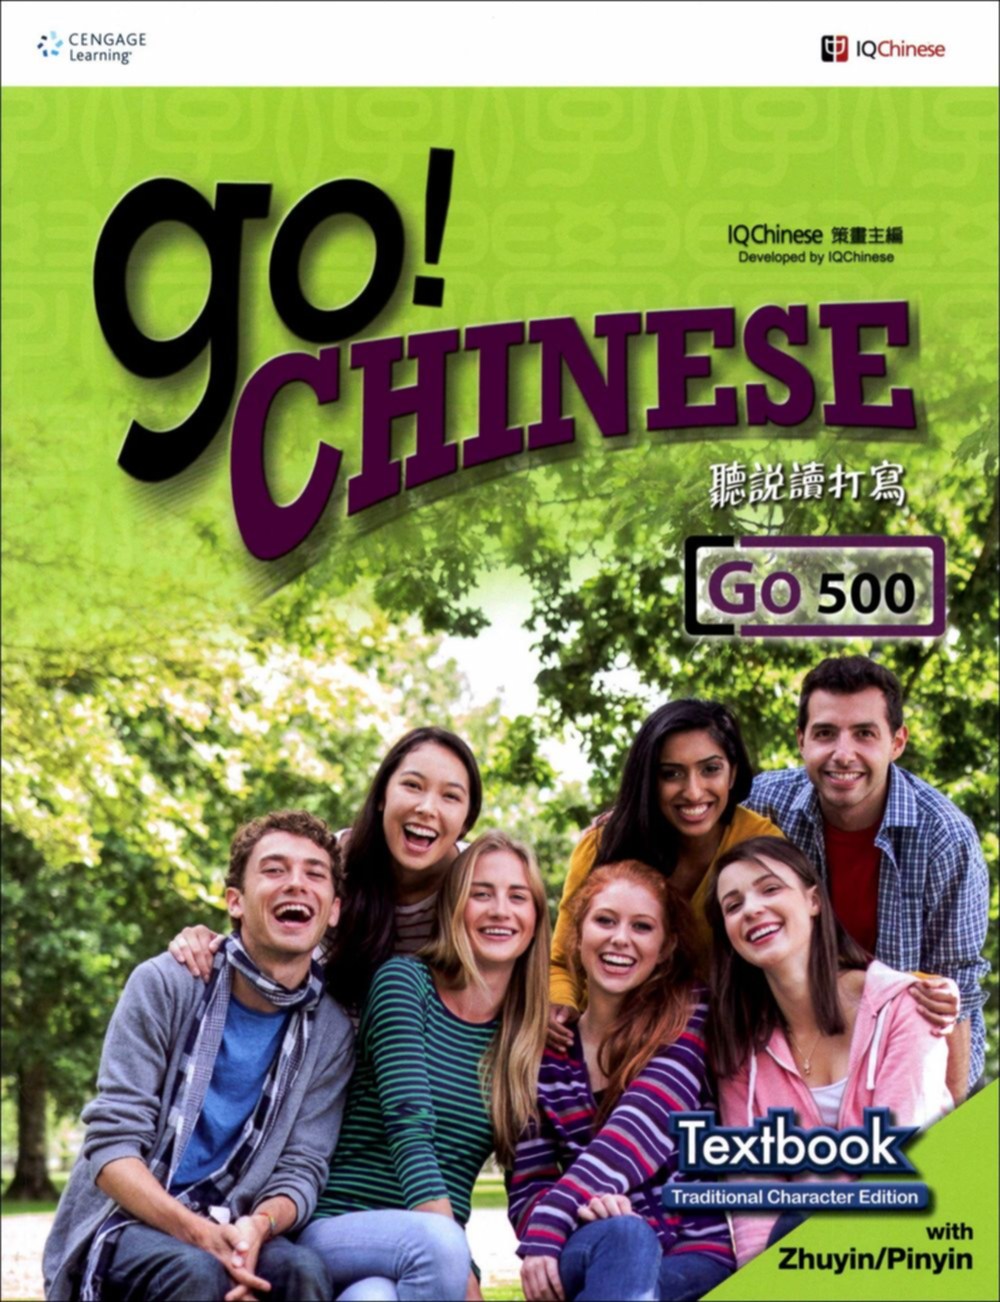 Go! Chinese Go500 Textbook (Traditional Character Edition with Zhuyin/Pinyin)